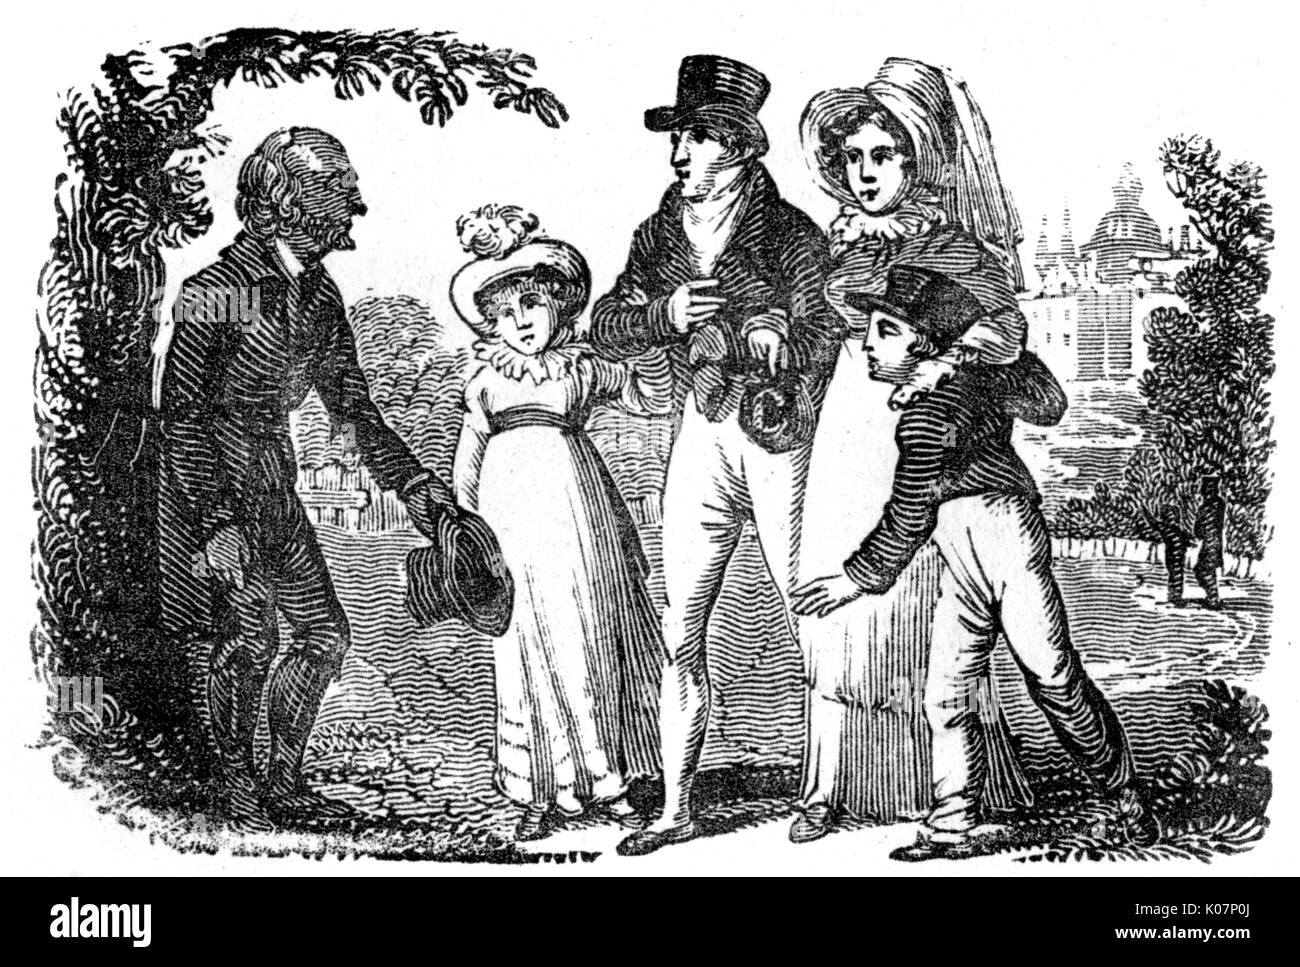 Well-to-do family encounter poor man, c.1800 Stock Photo